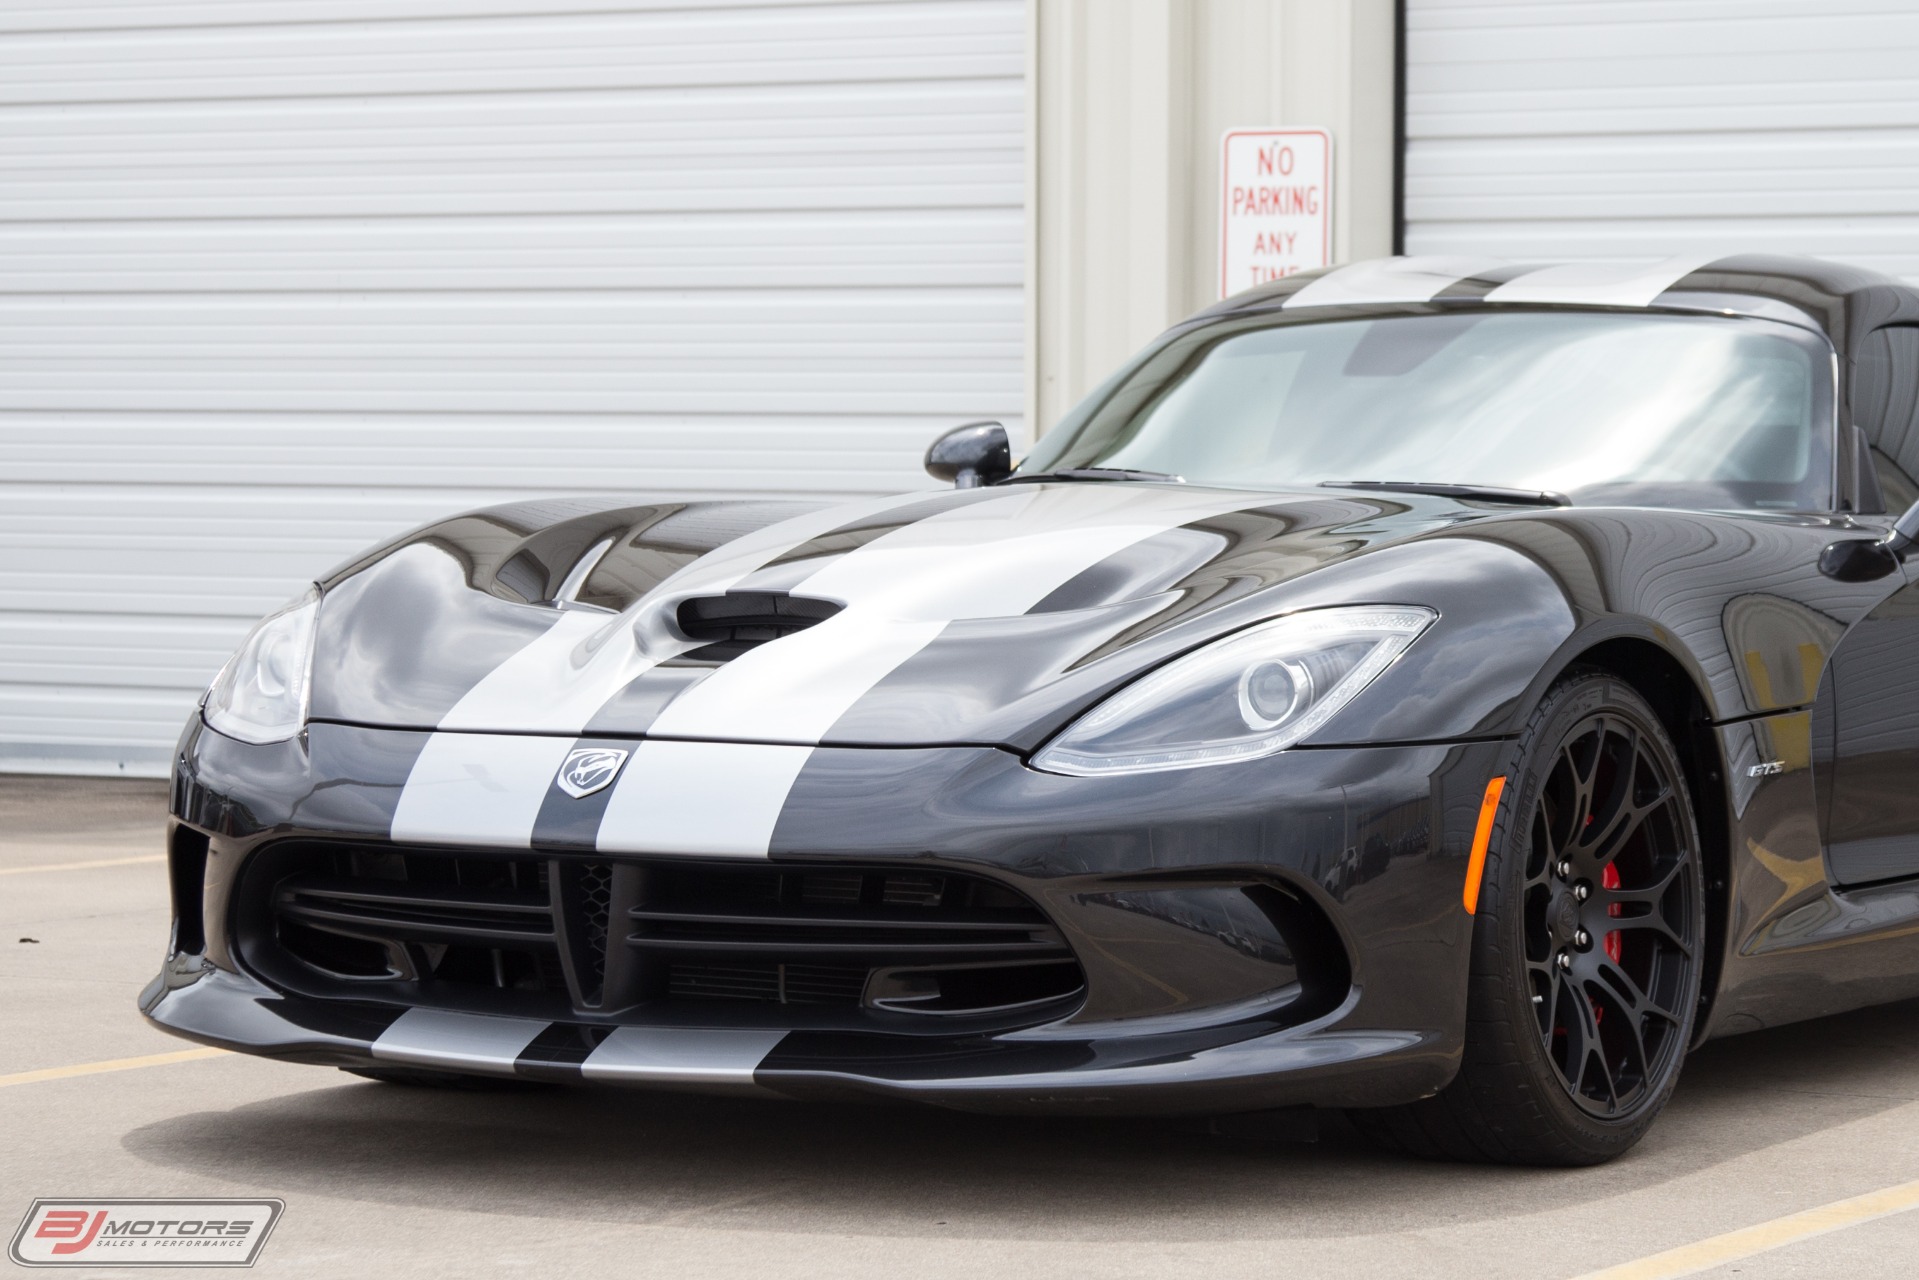 Used-2014-Dodge-Viper-GTS-VE-Tractive-Electronic-Suspension